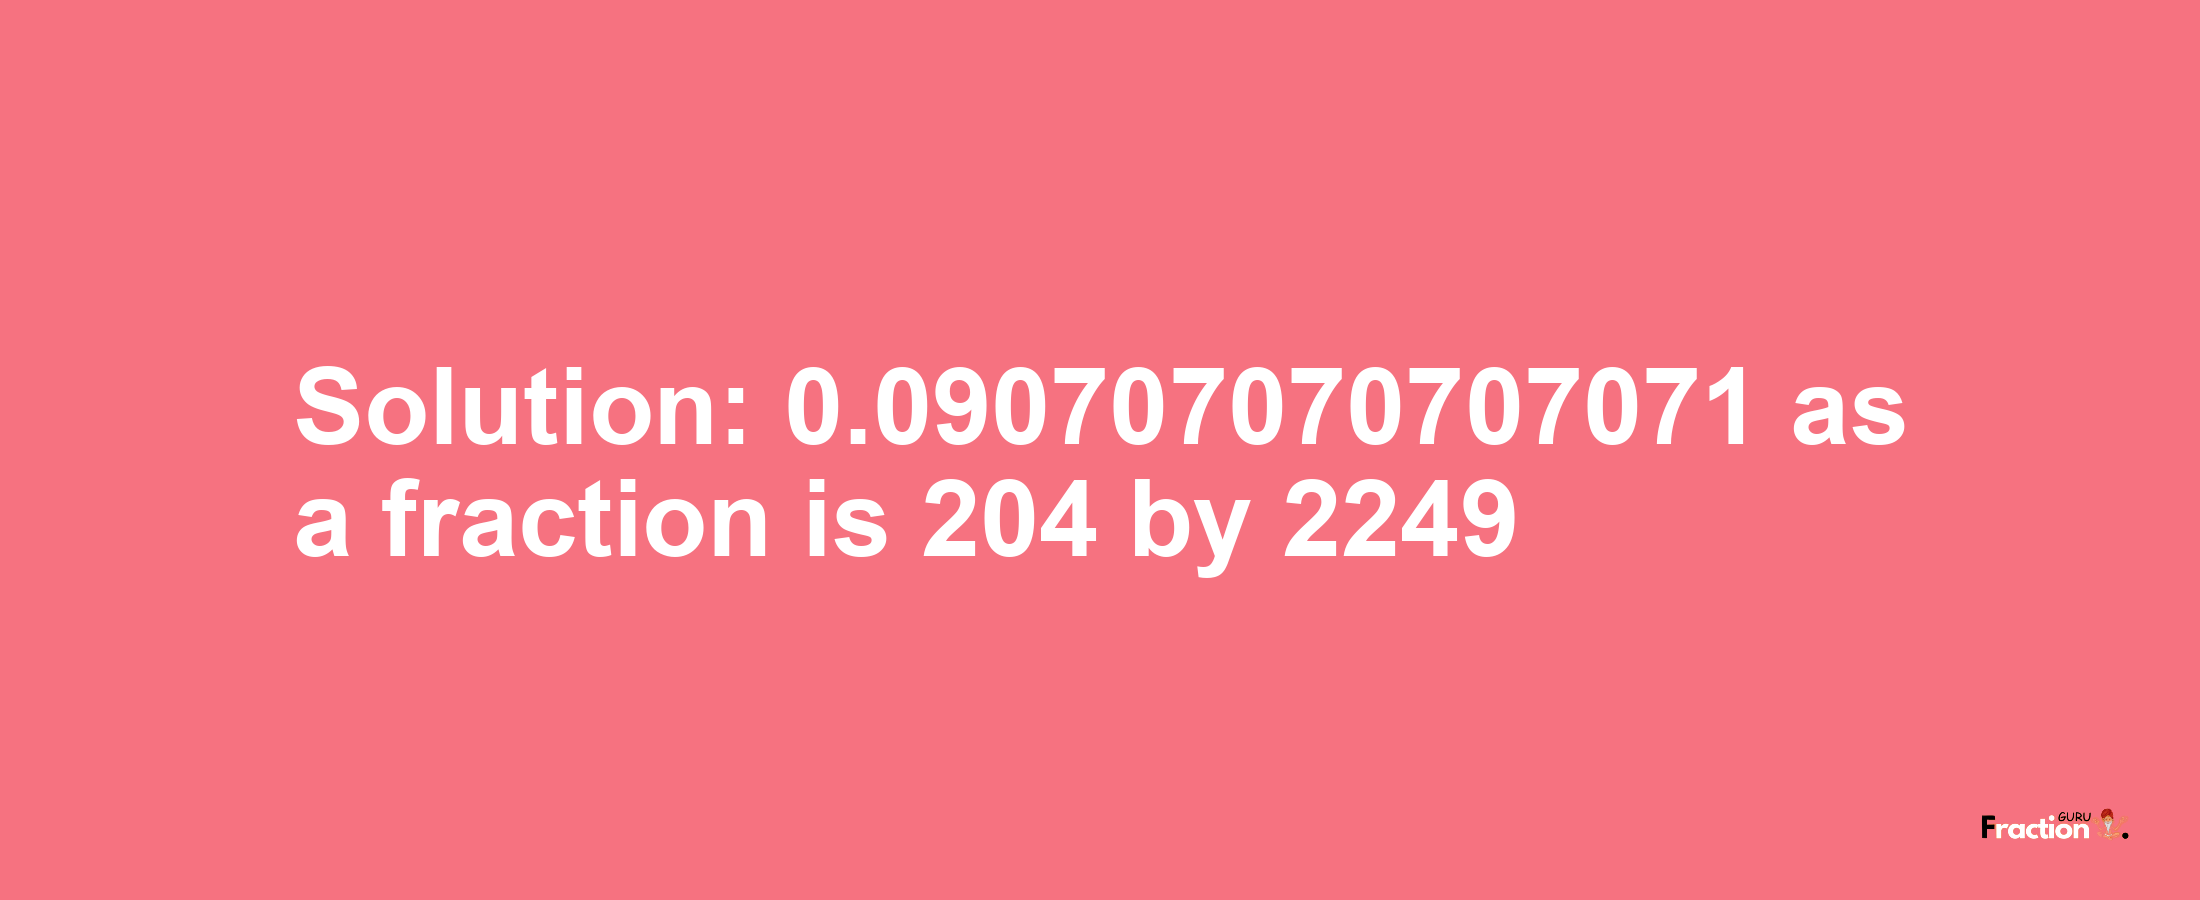 Solution:0.090707070707071 as a fraction is 204/2249